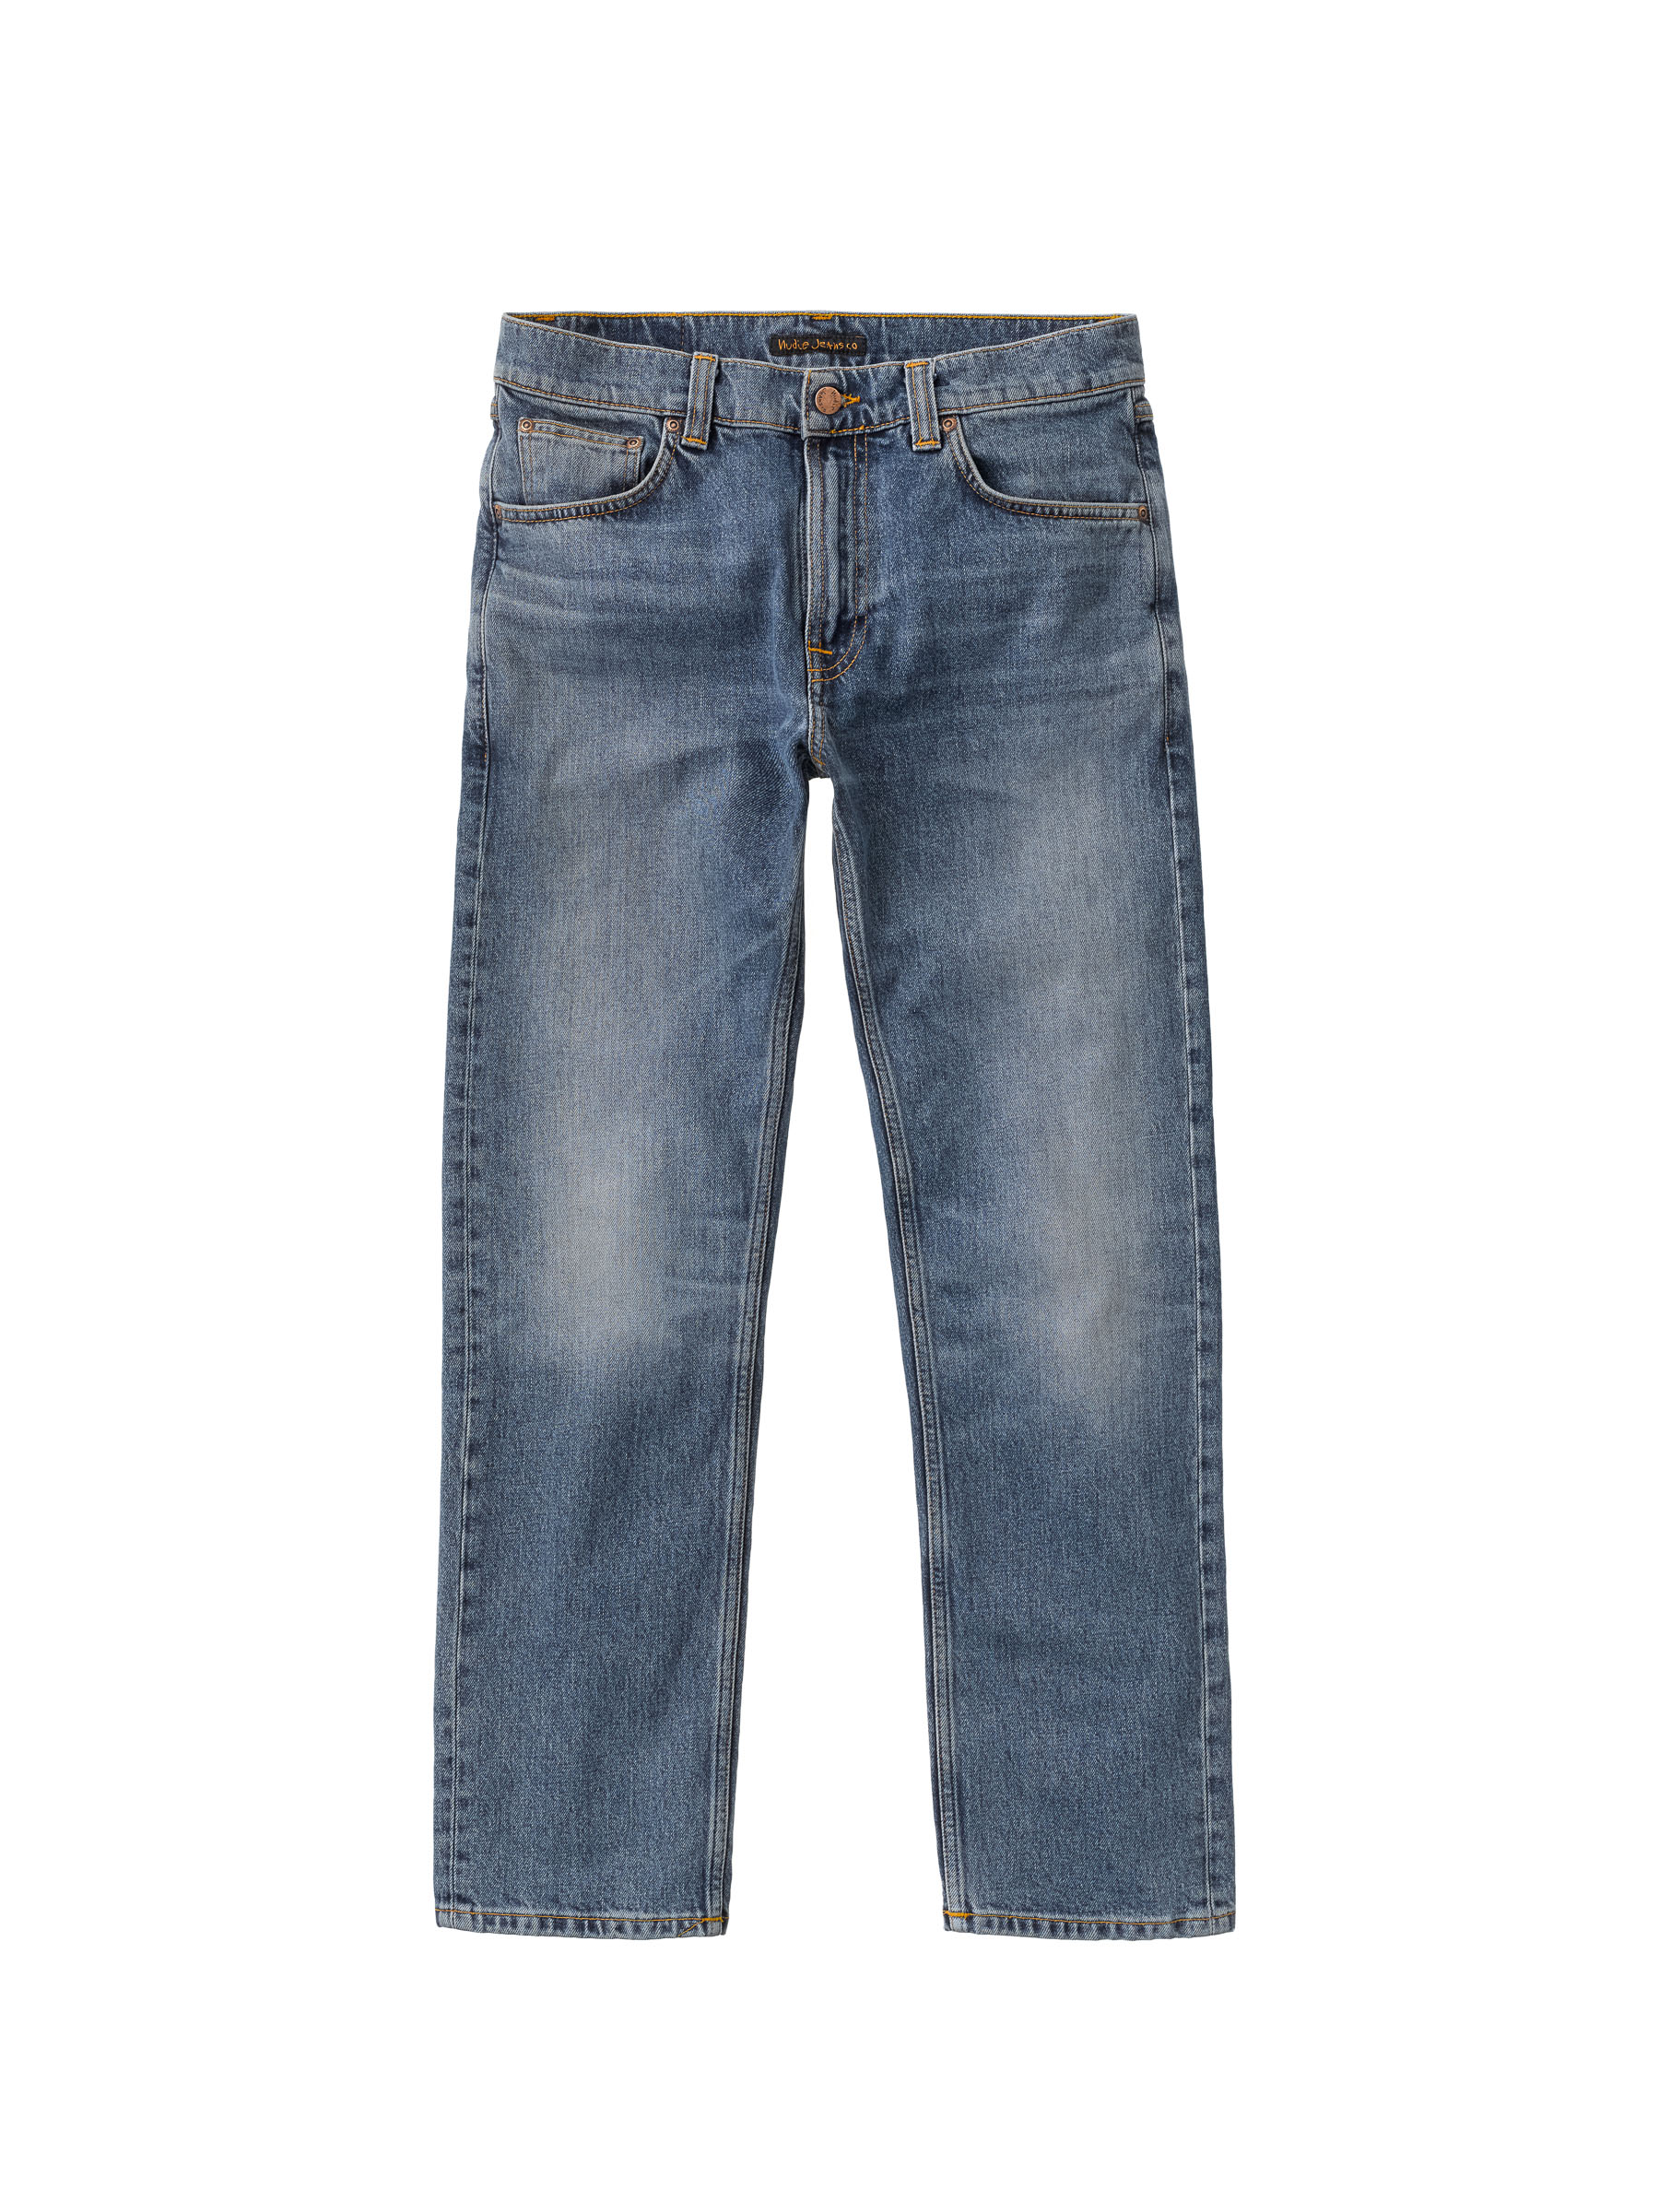 Nudie Jeans - GRITTY JACKSON - Old Gold